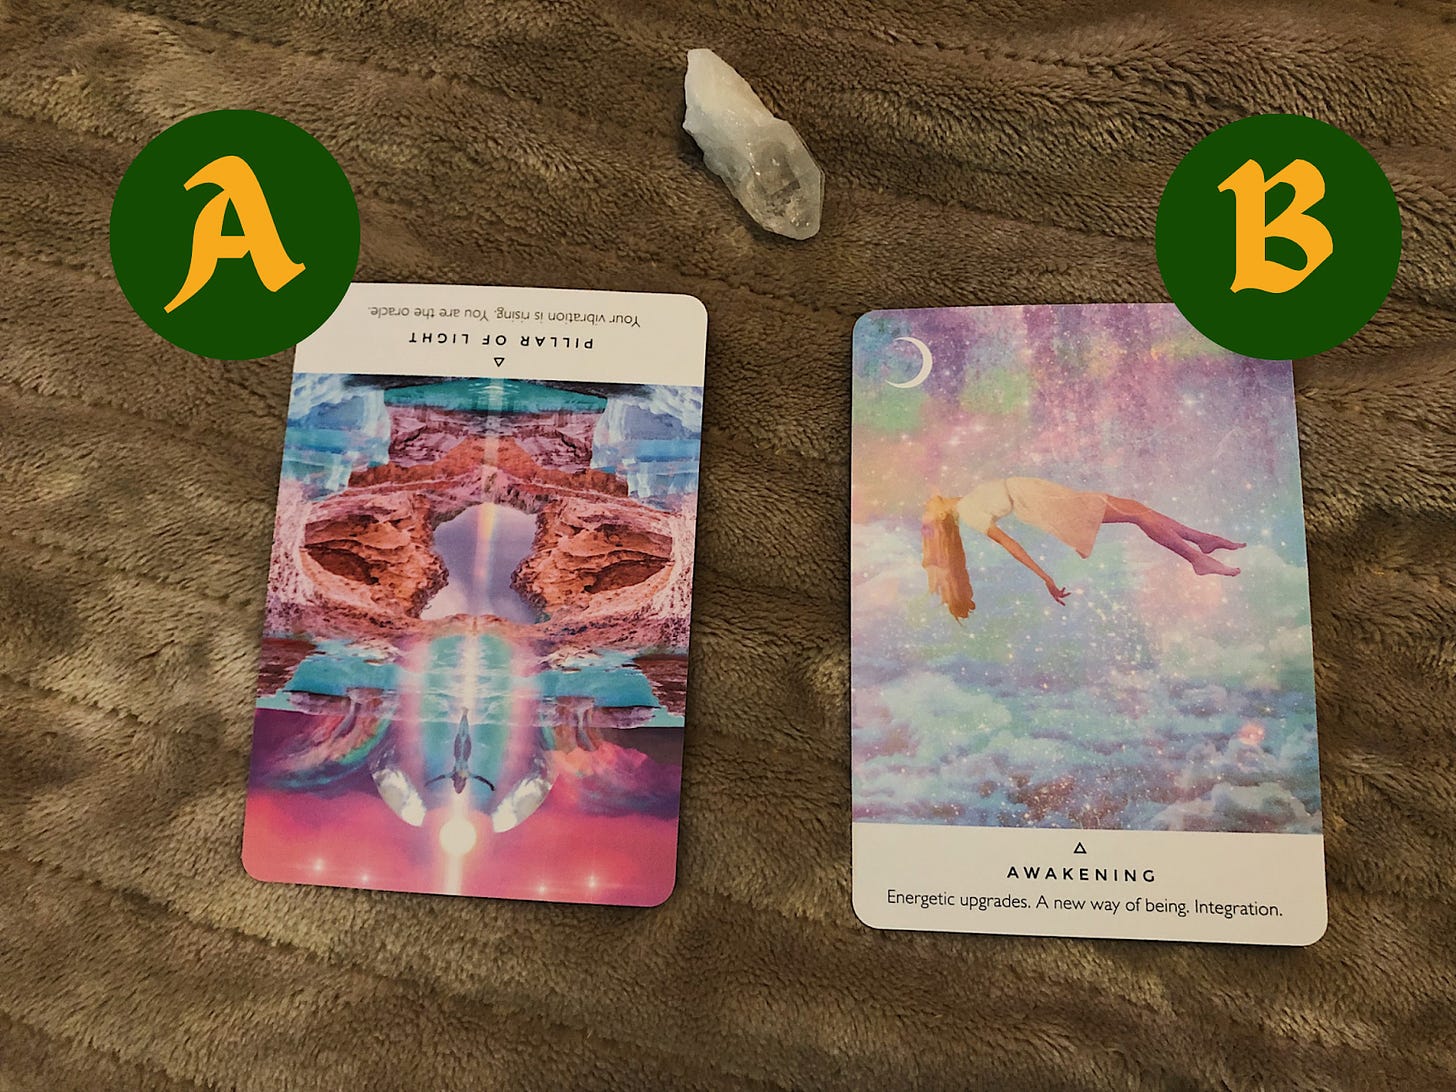 Two cards faced upright on a beige heated blanket with the left card being pink, purple, and blue with mountains and rivers and says "Pillar of light: Your vibration is rising. You are the oracle." The card on the right has a floating woman in a pastel purple and blue space and clouds that says "Awakening: Energetic upgrades. A new way of being. Integration."